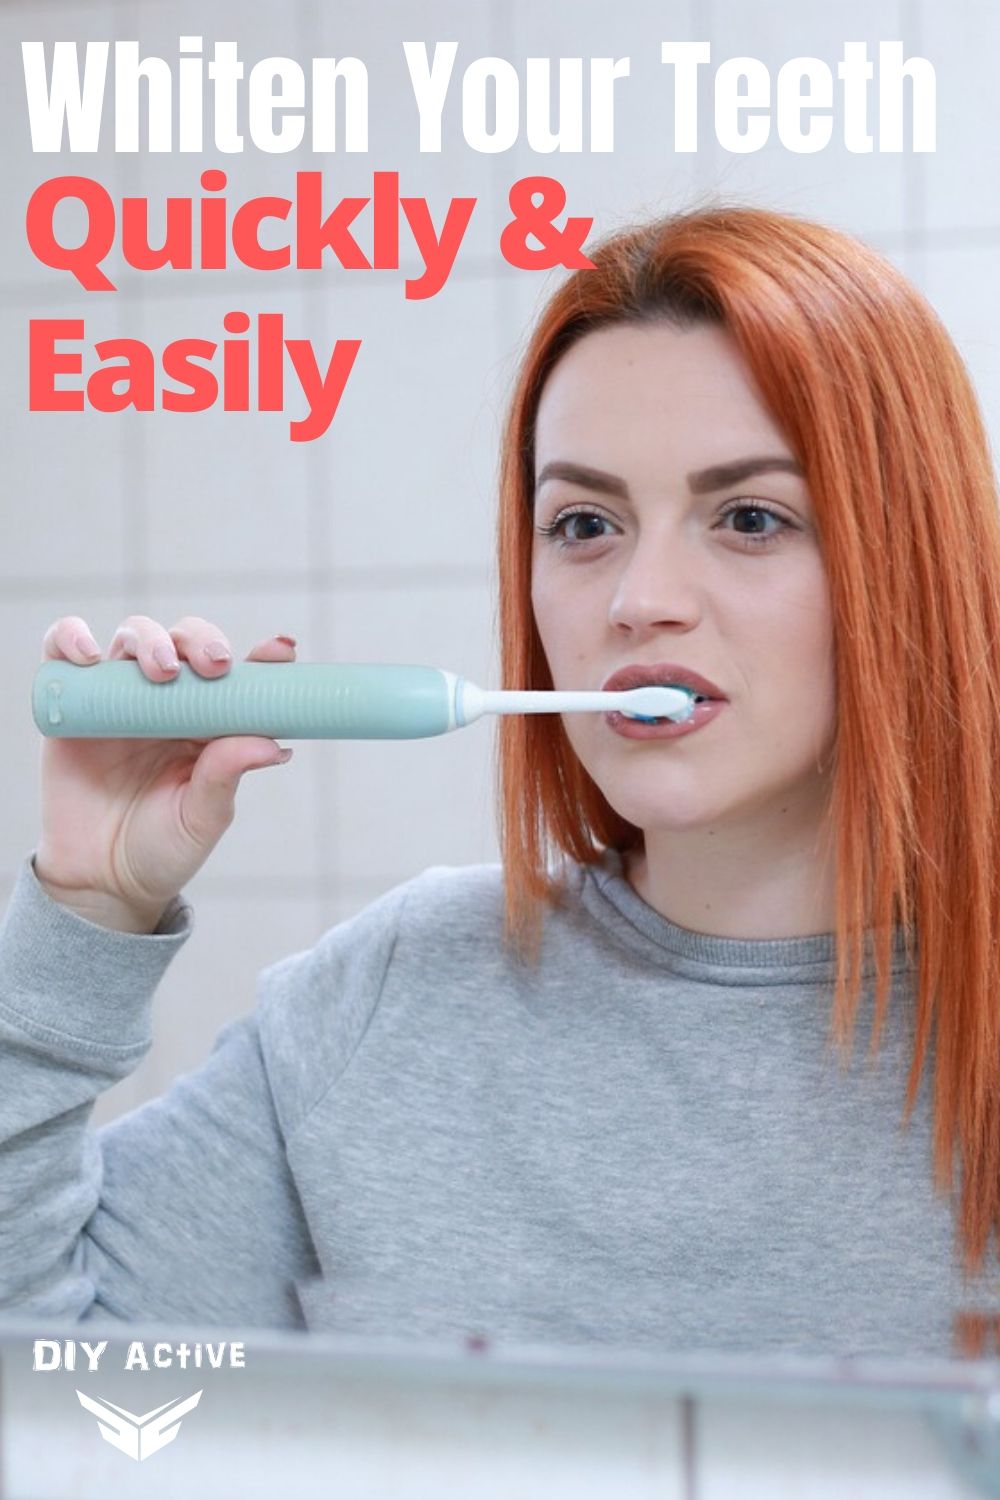 SNOW Review: Whiten Your Teeth Quickly and Easily